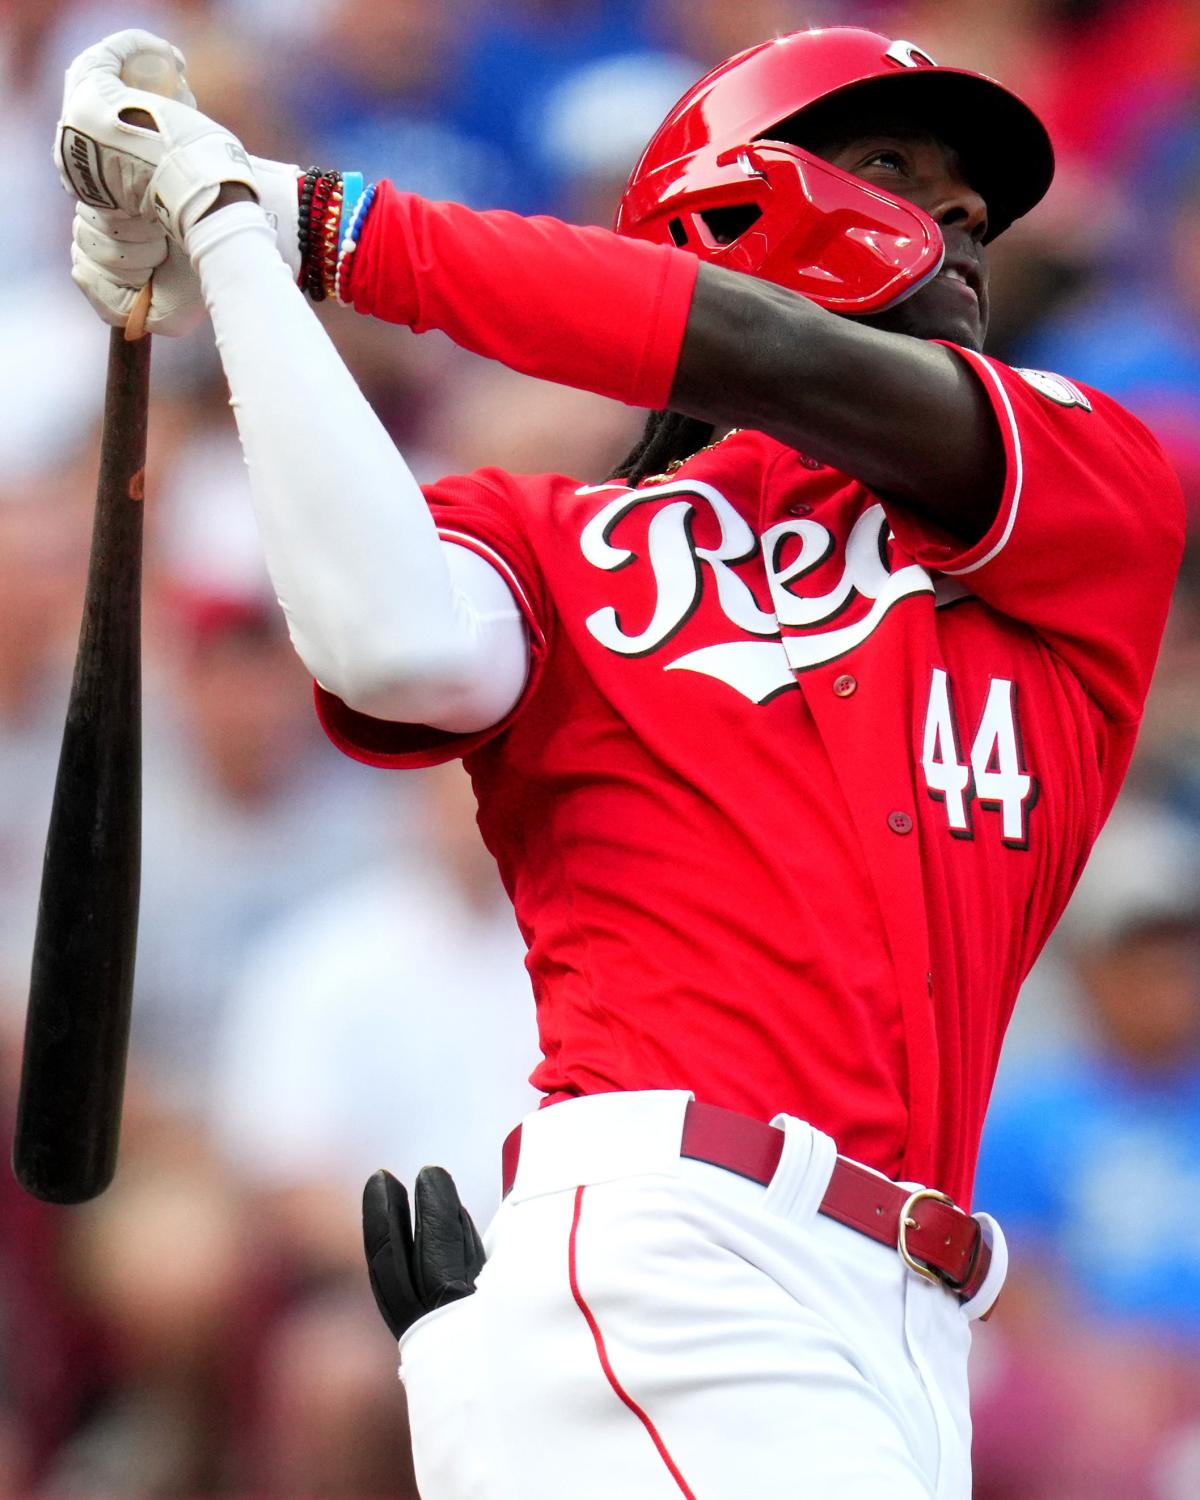 Cincinnati Reds on X: Two homer poses > one homer pose https